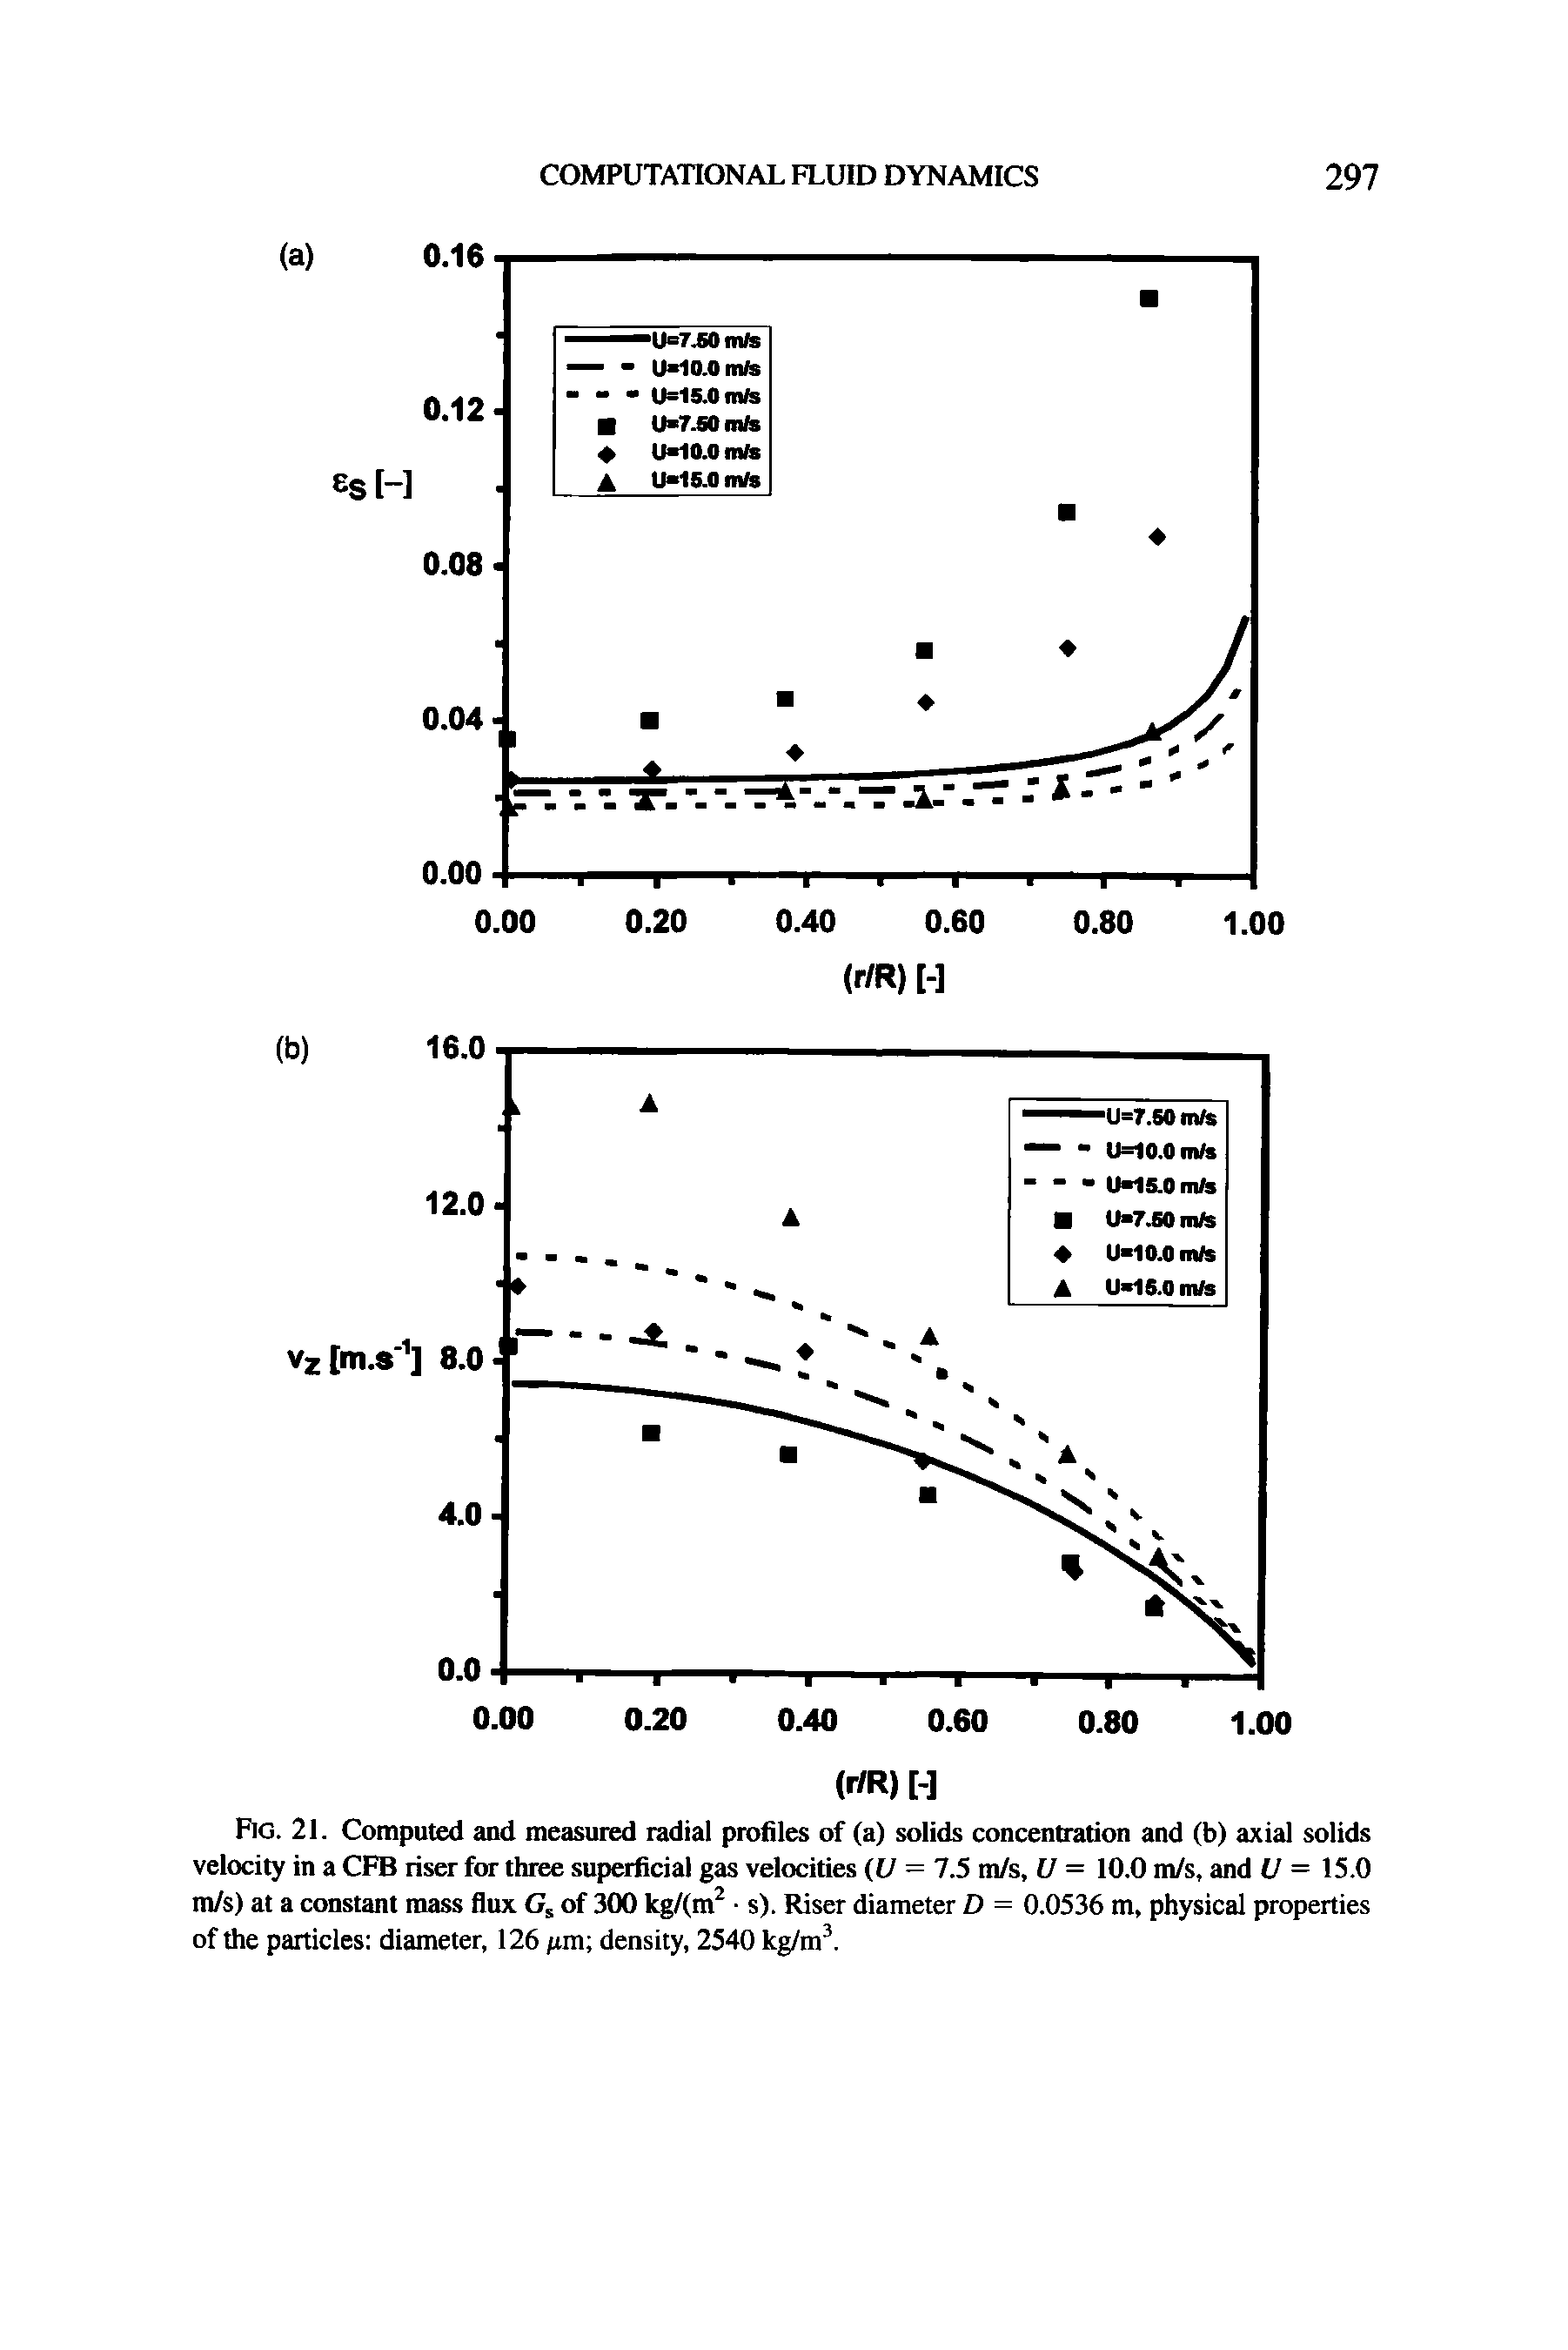 Fig. 21. Computed and measured radial profiles of (a) solids concentration and (b) axial solids velocity in a CFB riser for three superficial gas velocities (U = 7.5 m/s, U = 10.0 m/s, and U = 15.0 m/s) at a constant mass flux of 300 kg/(m s). Riser diameter D = 0.0536 m, physical properties of the particles diameter, 126 pm density, 2540 kg/m. ...